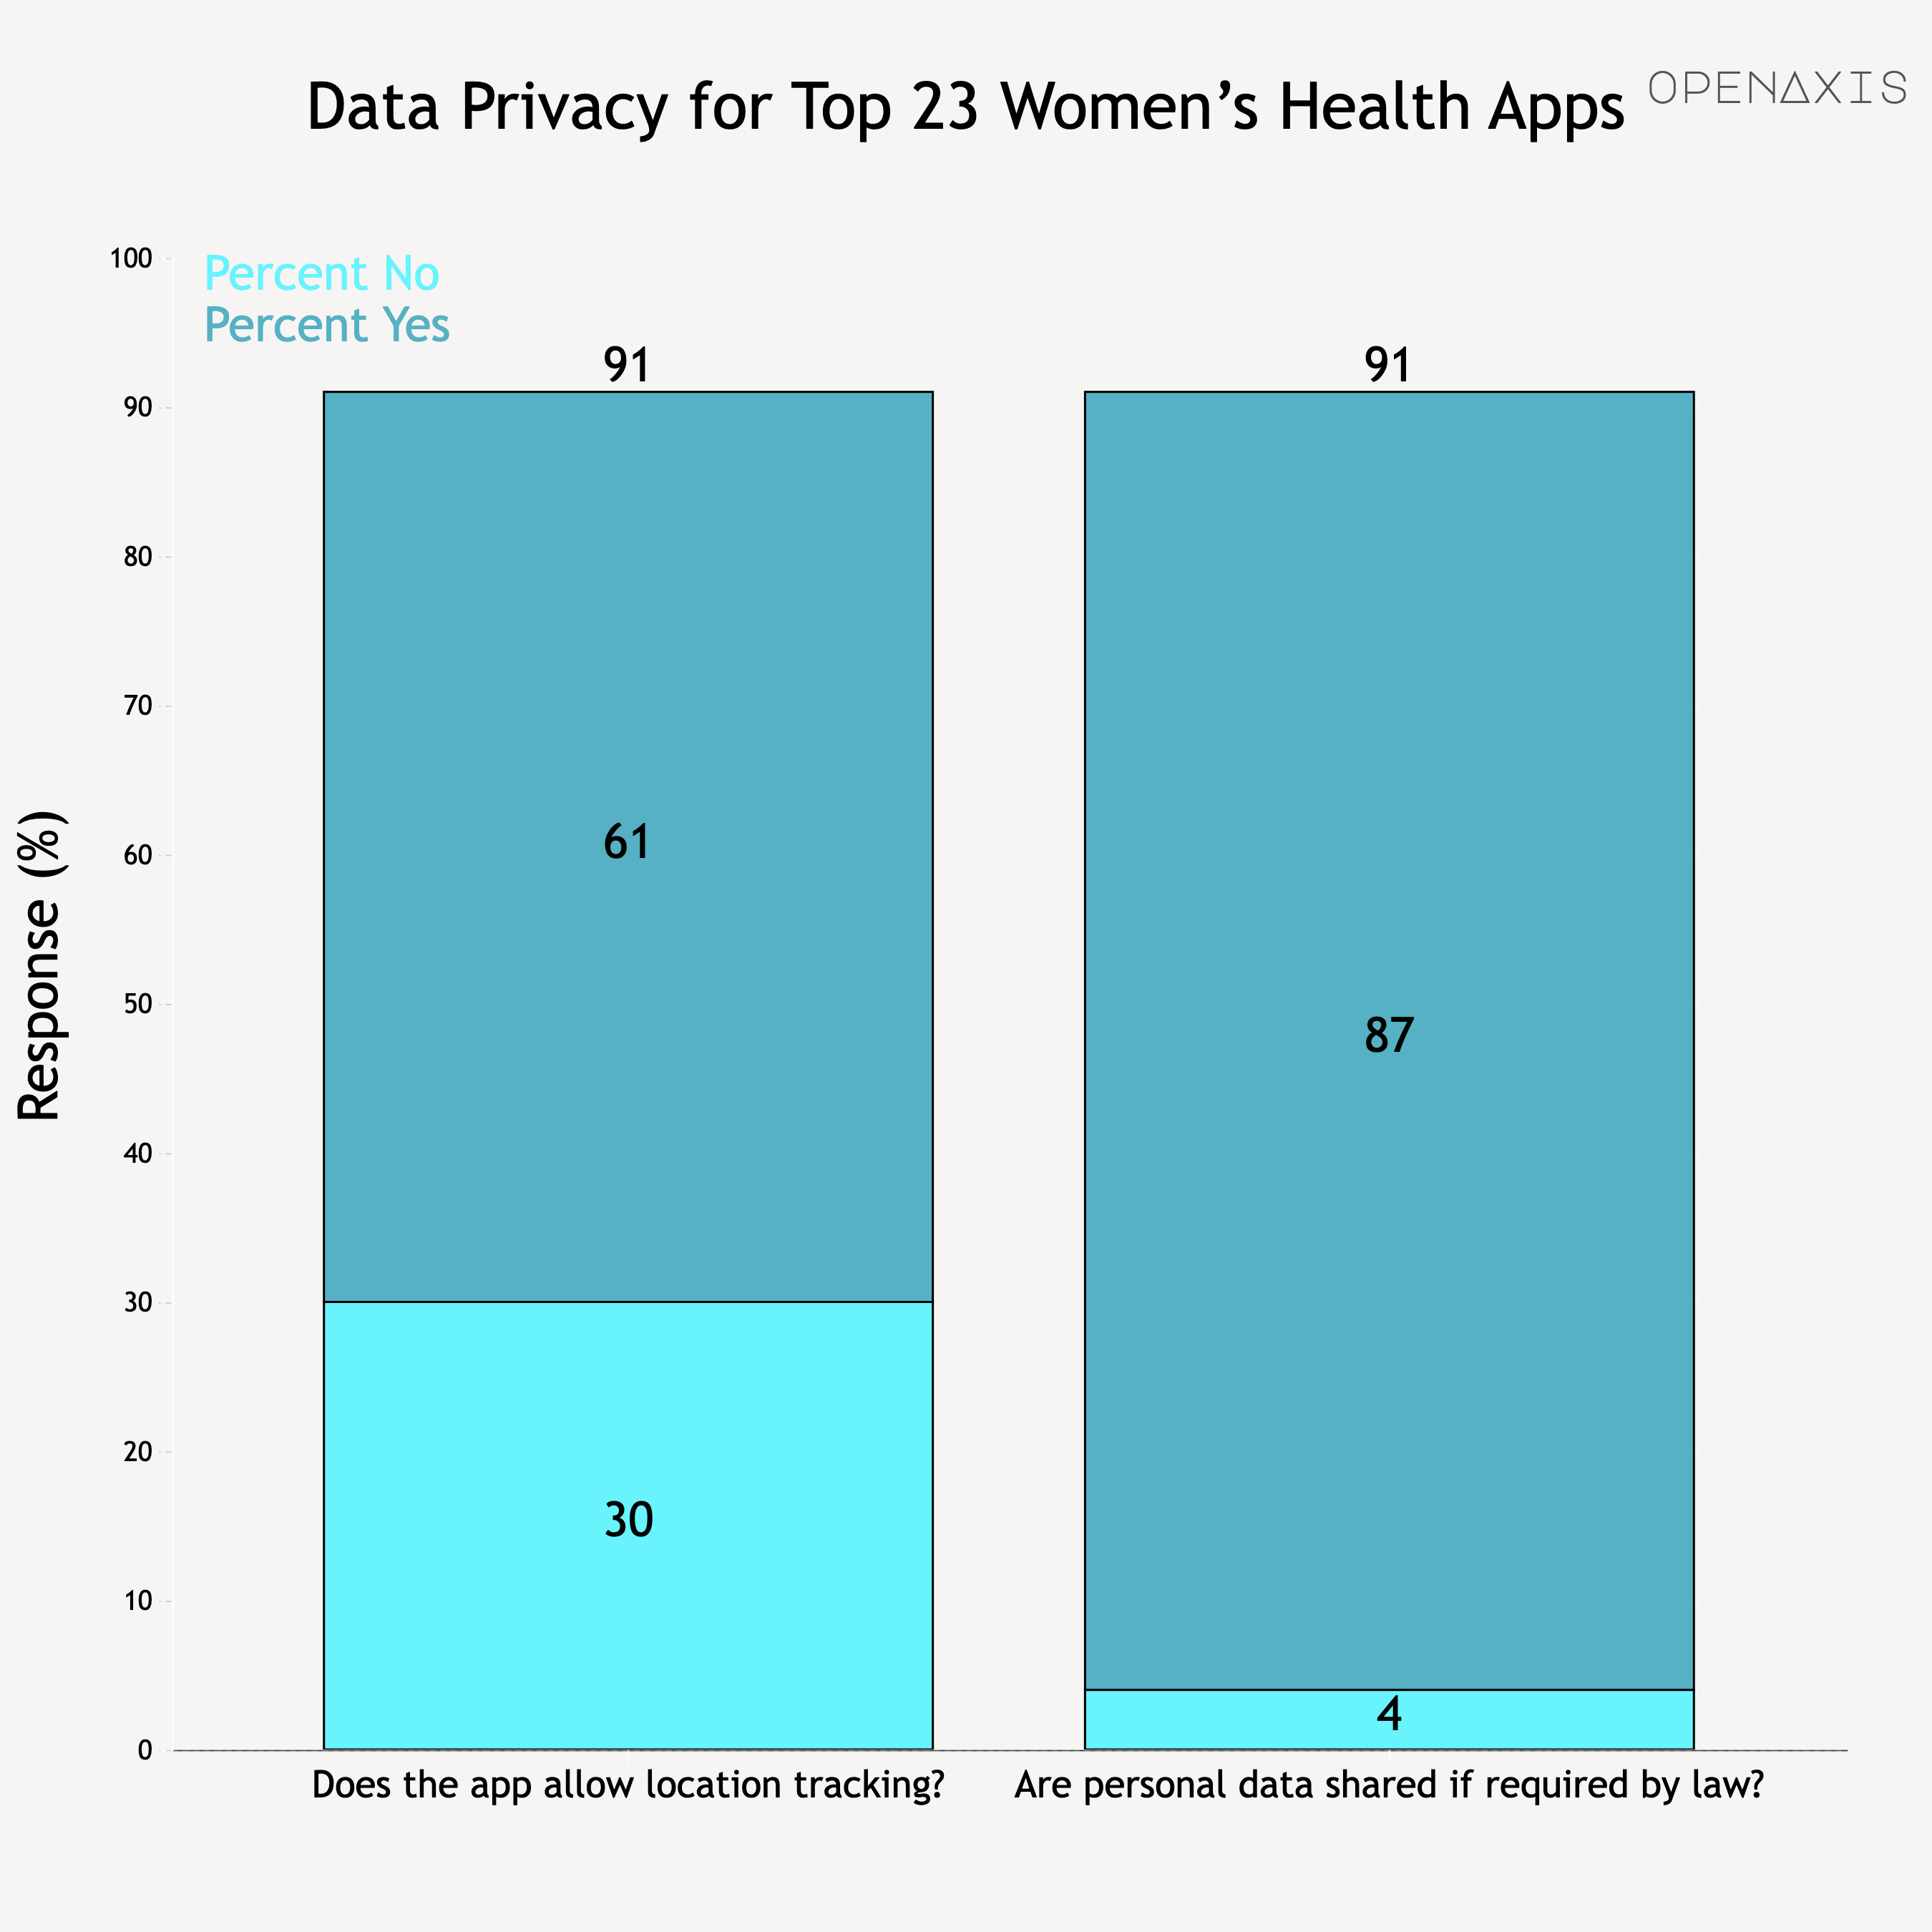 <p><strong>Results:</strong></p><p><span>"All 23 apps collected personal health-related data. All apps allowed behavioral tracking, and 61% (14/23) of the apps allowed location tracking. Of the 23 apps, only 16 (70%) displayed a privacy policy, 12 (52%) requested consent from users, and 1 (4%) had a pseudoconsent. In addition, 13% (3/23) of the apps collected data before obtaining consent. Most apps (20/23, 87%) shared user data with third parties, and data sharing information could not be obtained for the 13% (3/23) remaining apps. Of the 23 apps, only 13 (57%) provided users with information on data security."</span></p><p><br /></p><p><span>Source: </span><a href="https://mhealth.jmir.org/2022/5/e33735/#box1" target="_blank"><strong>JMIR Mhealth Uhealth 2022</strong></a></p>